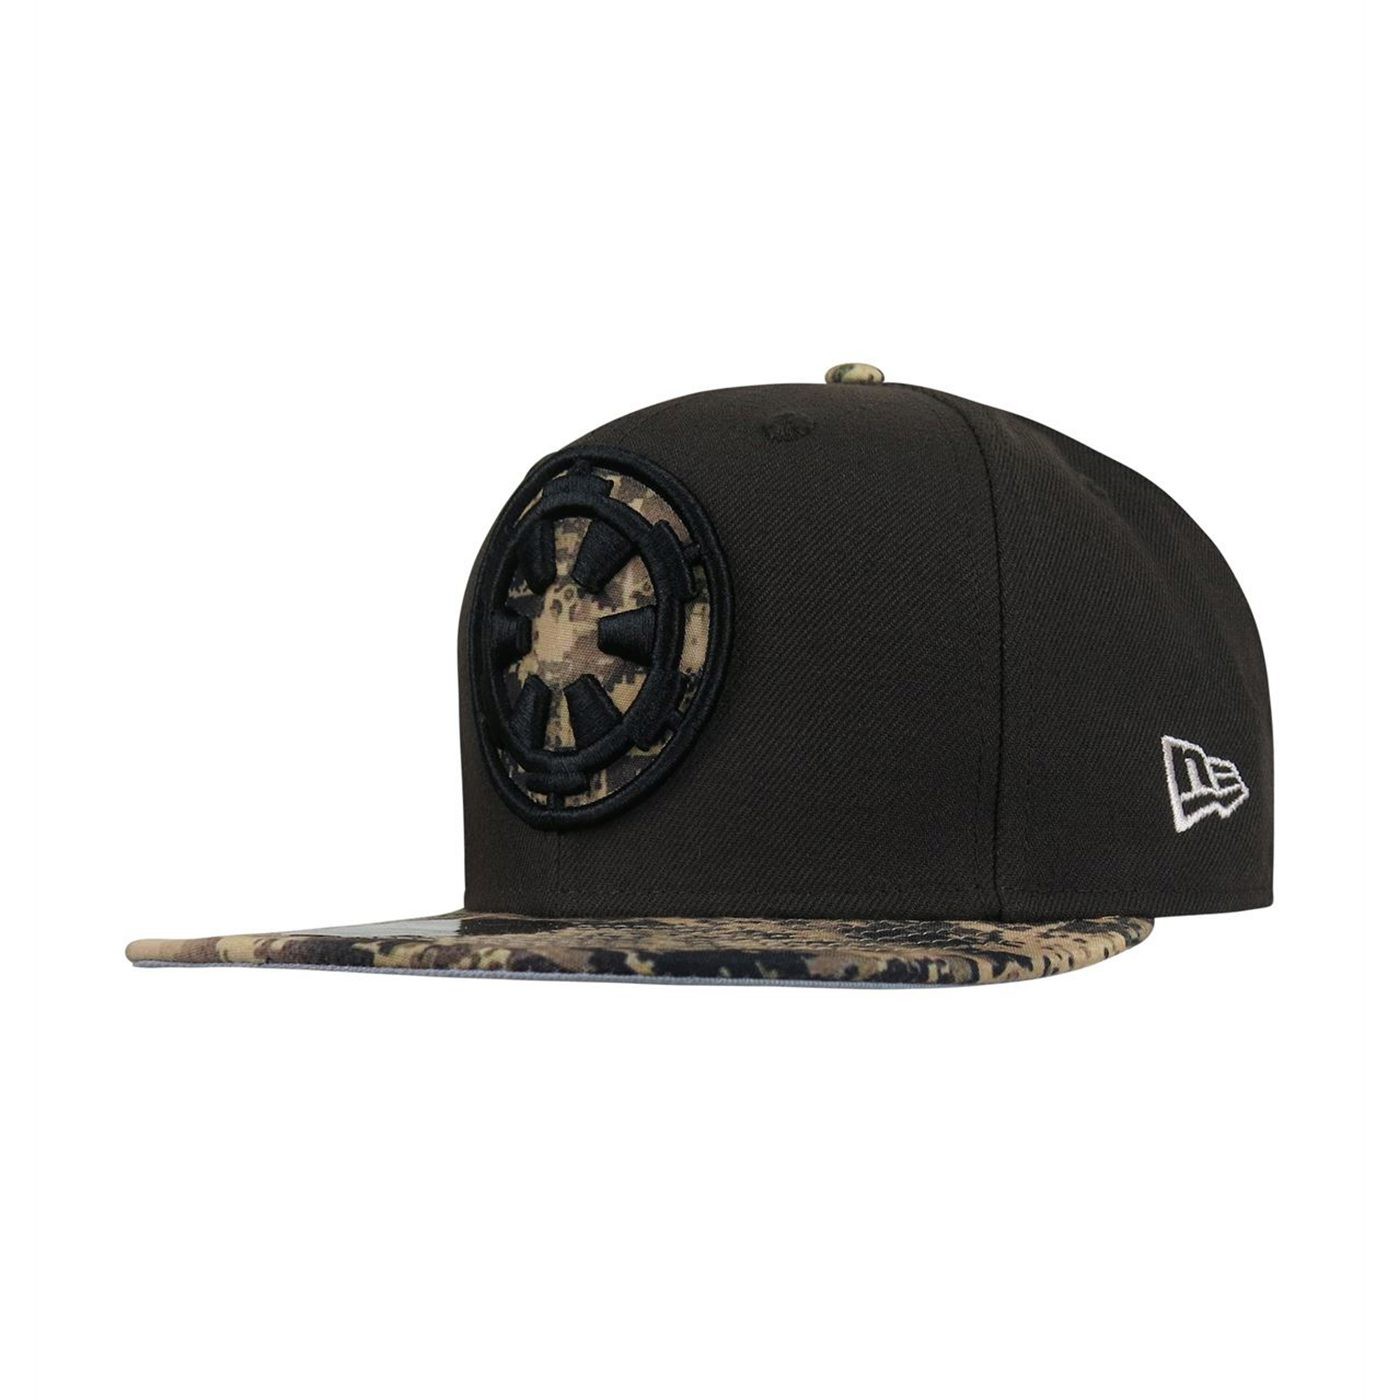 Star Wars Rogue One Empire Camo 9Fifty Snapback Hat